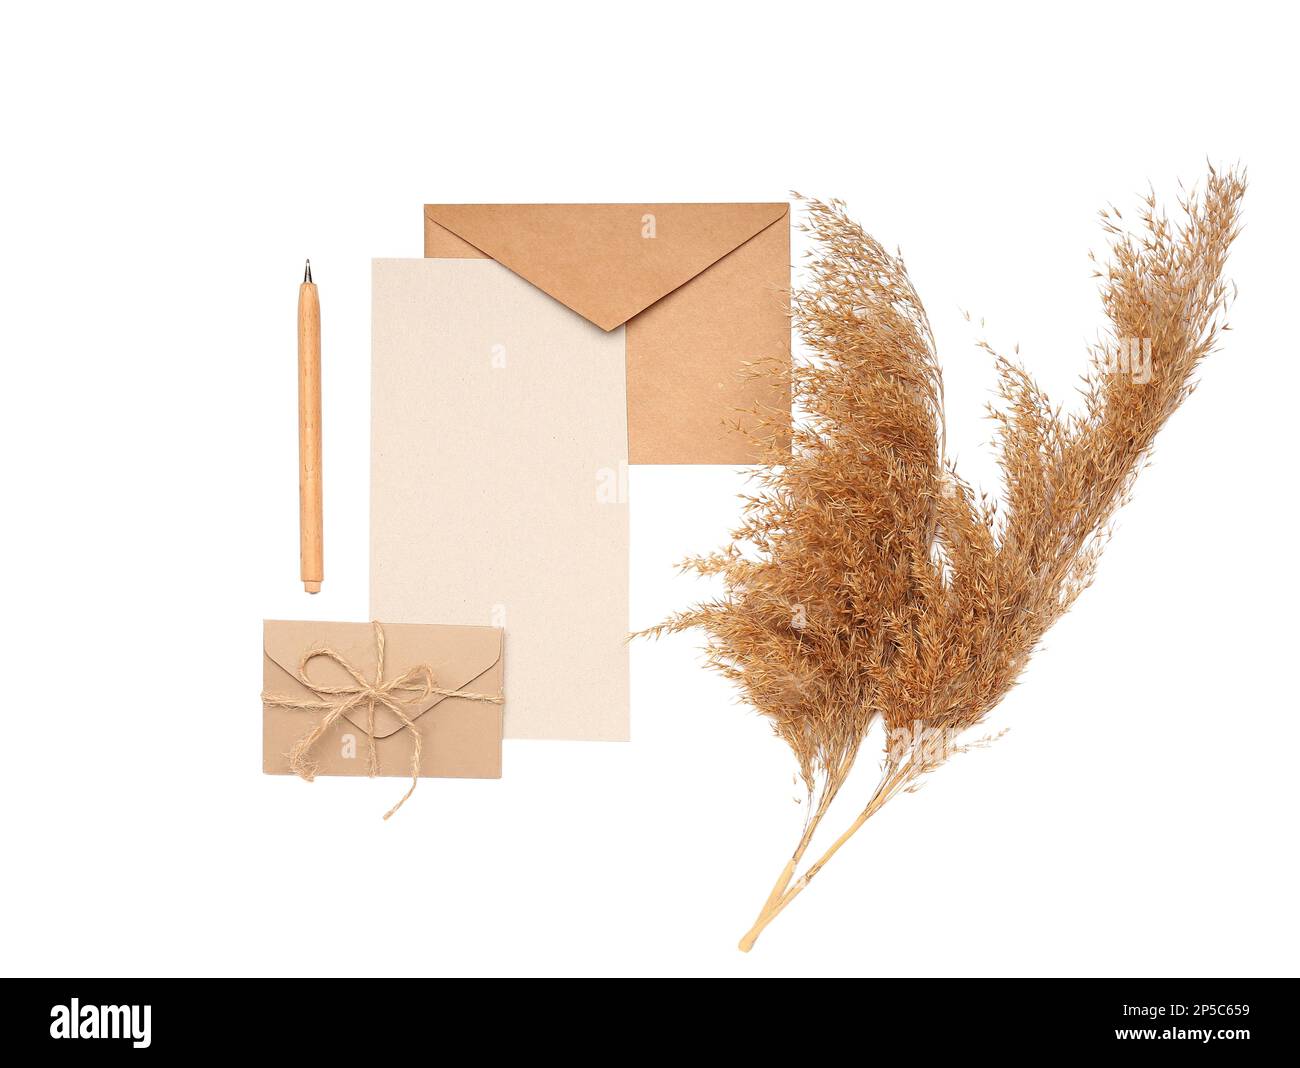 Composition with blank card, envelopes, pen and pampas grass on white background Stock Photo